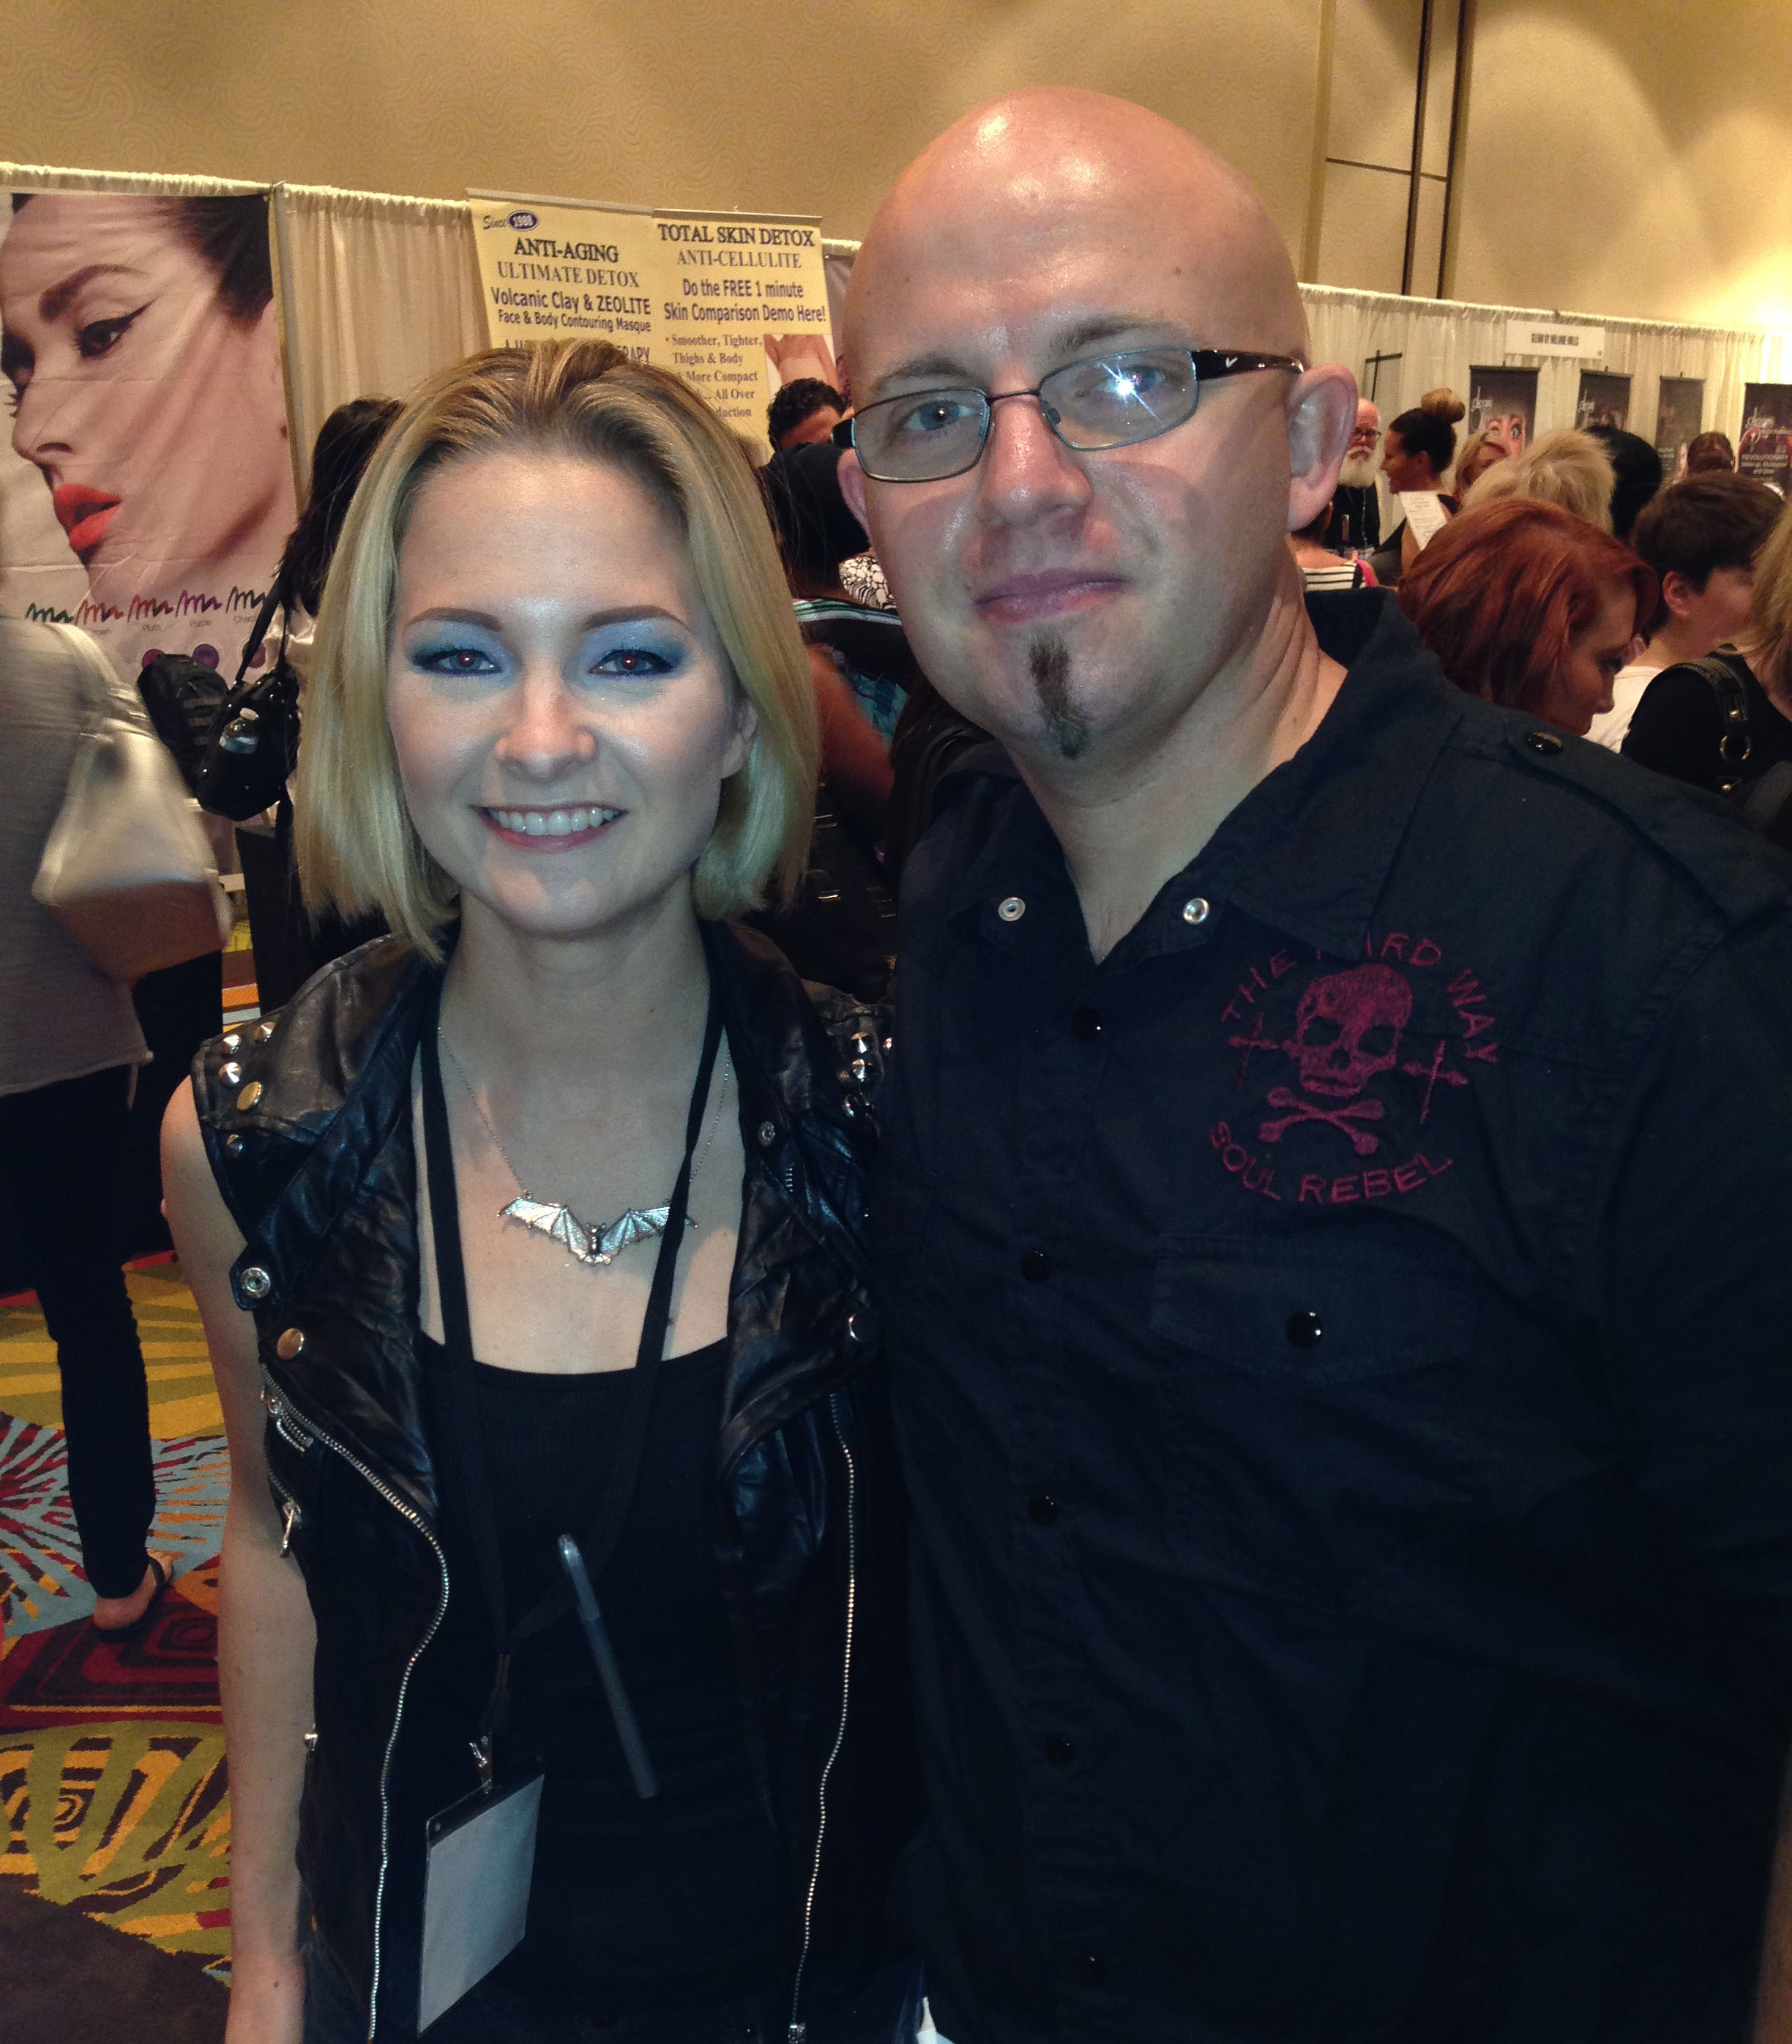 Laura Tyler from Syfy's Face Off at the Orlando Makeup Convention